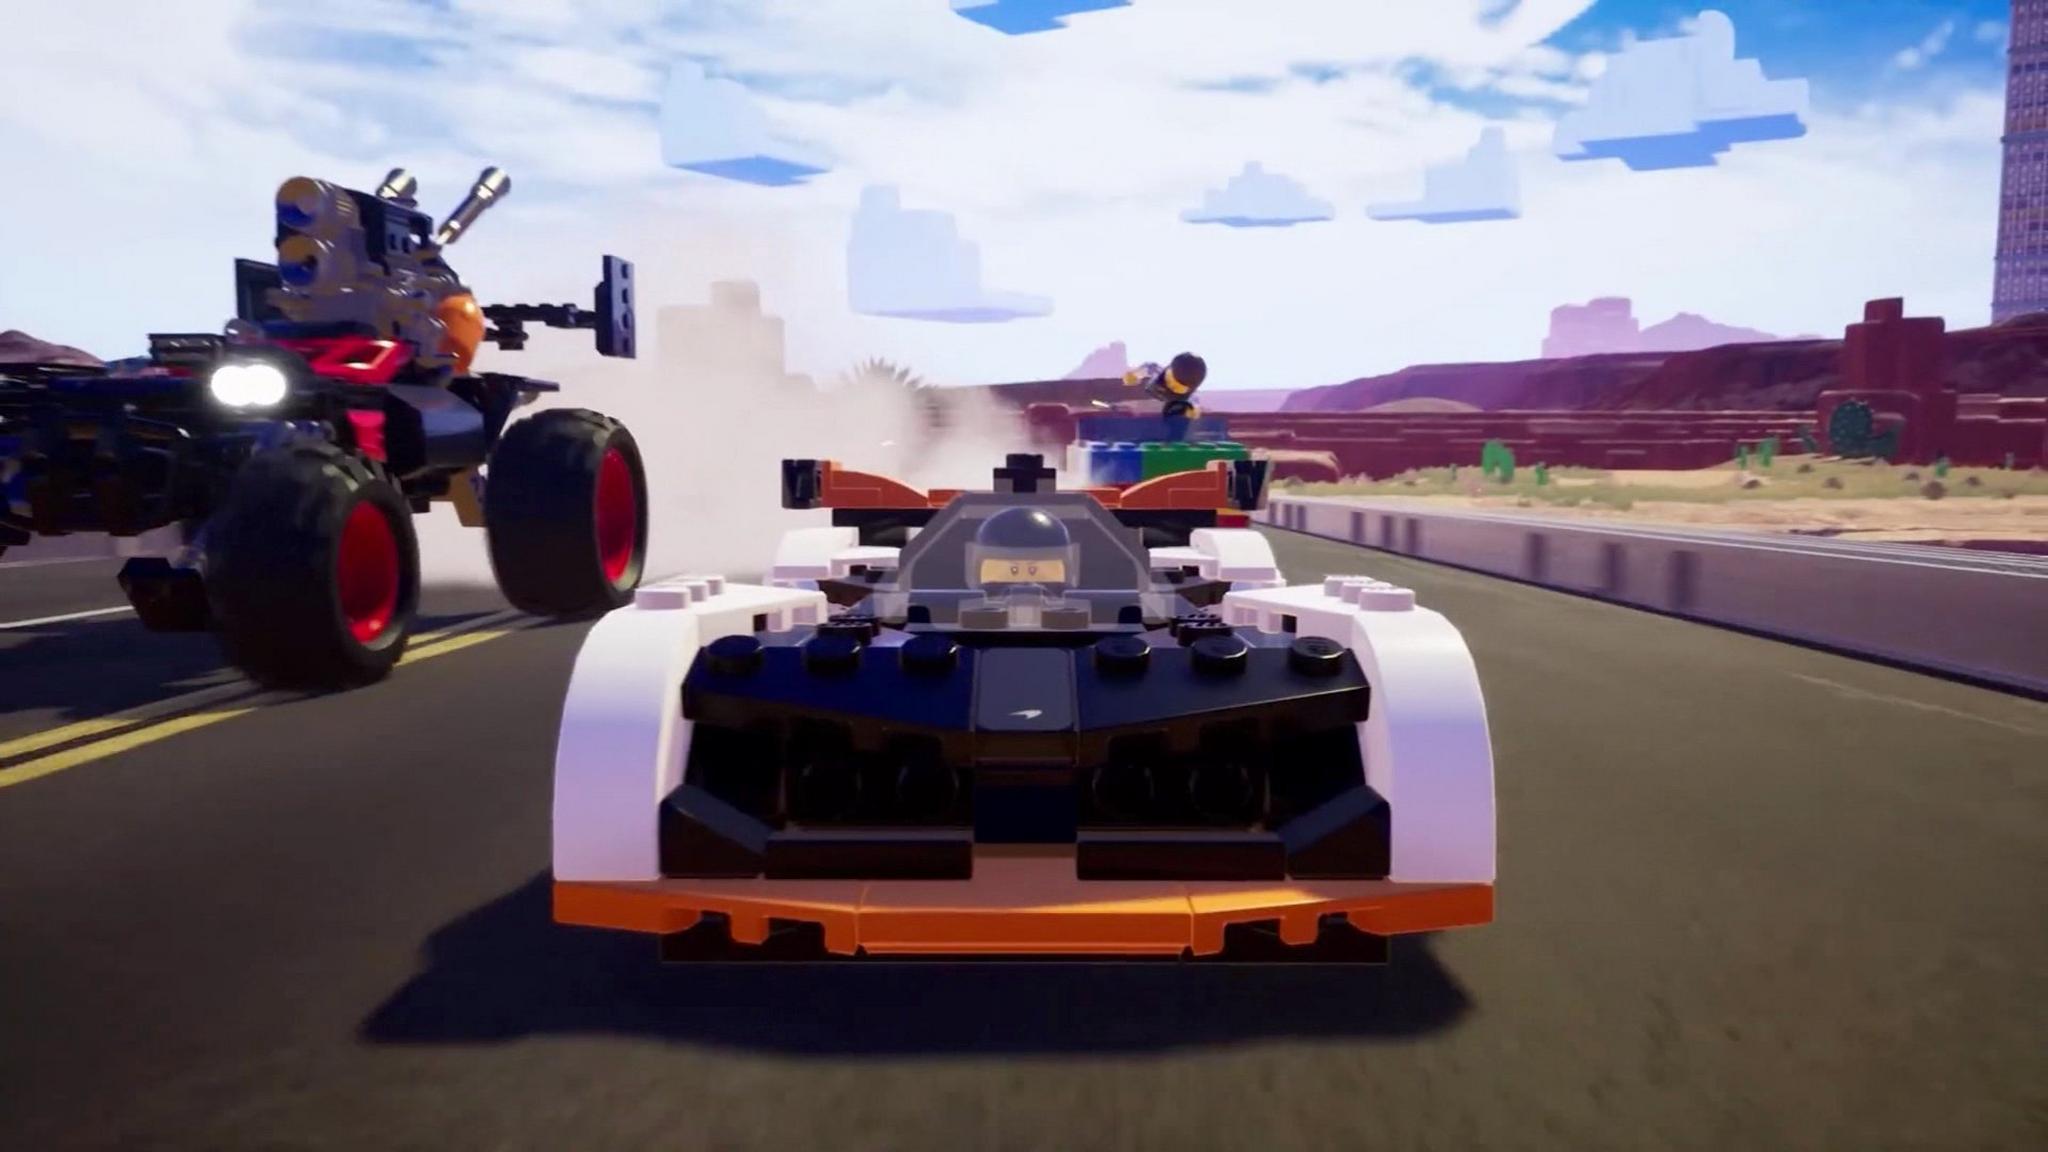 Lego 2K Drive - PlayStation 5 Game